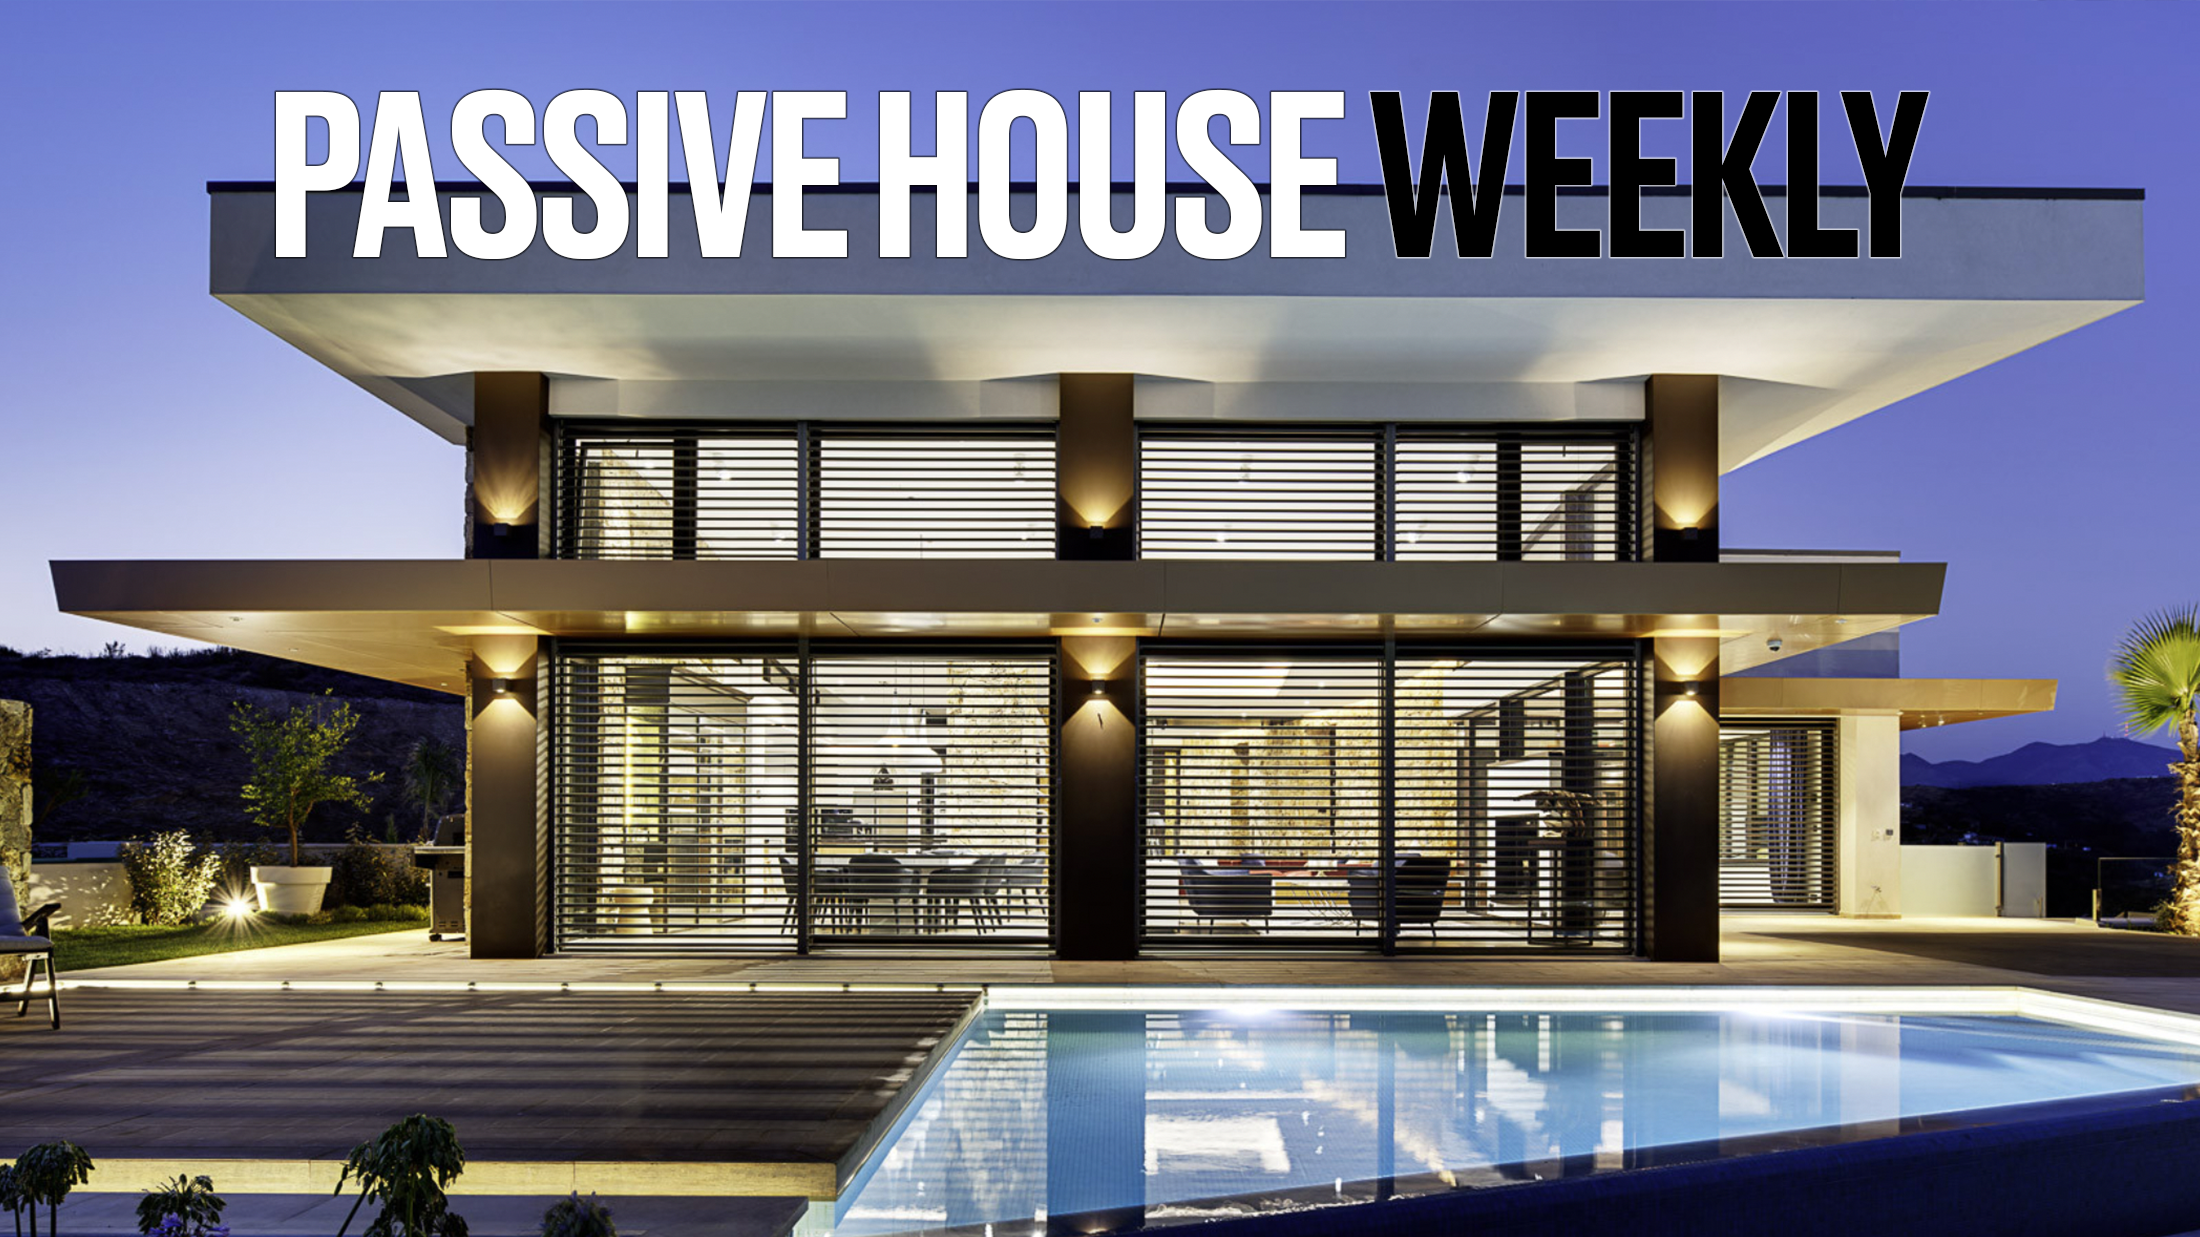 Passive House Weekly February 6th, 2022